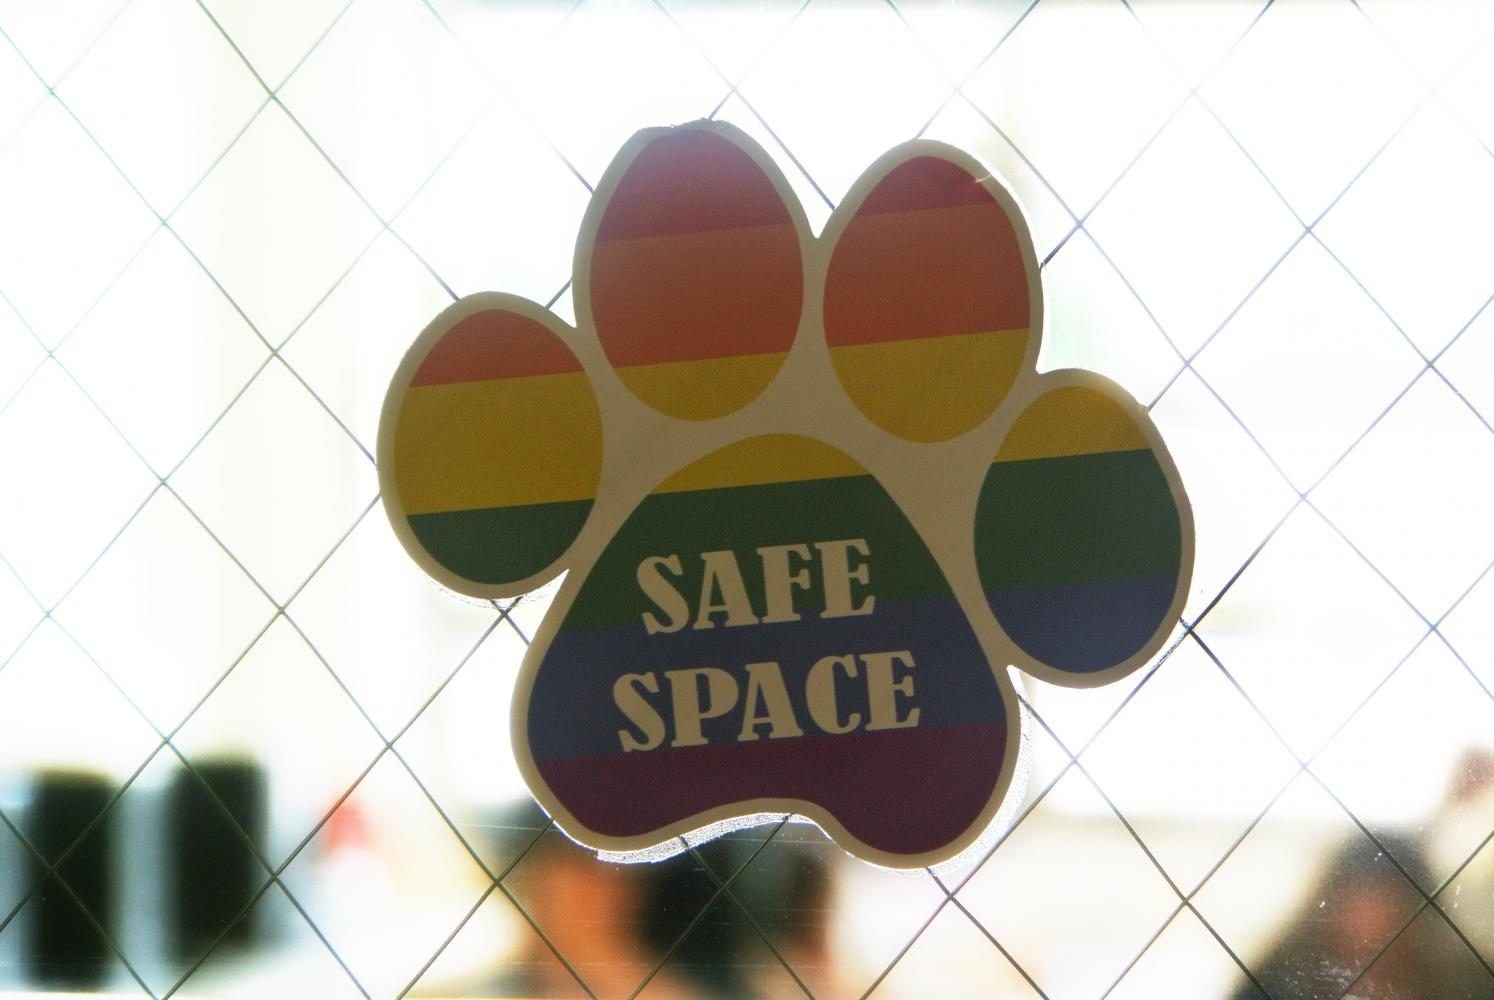 One example of the many safe space stickers hung on teachers windows to show support for their LGBTQ+ students.